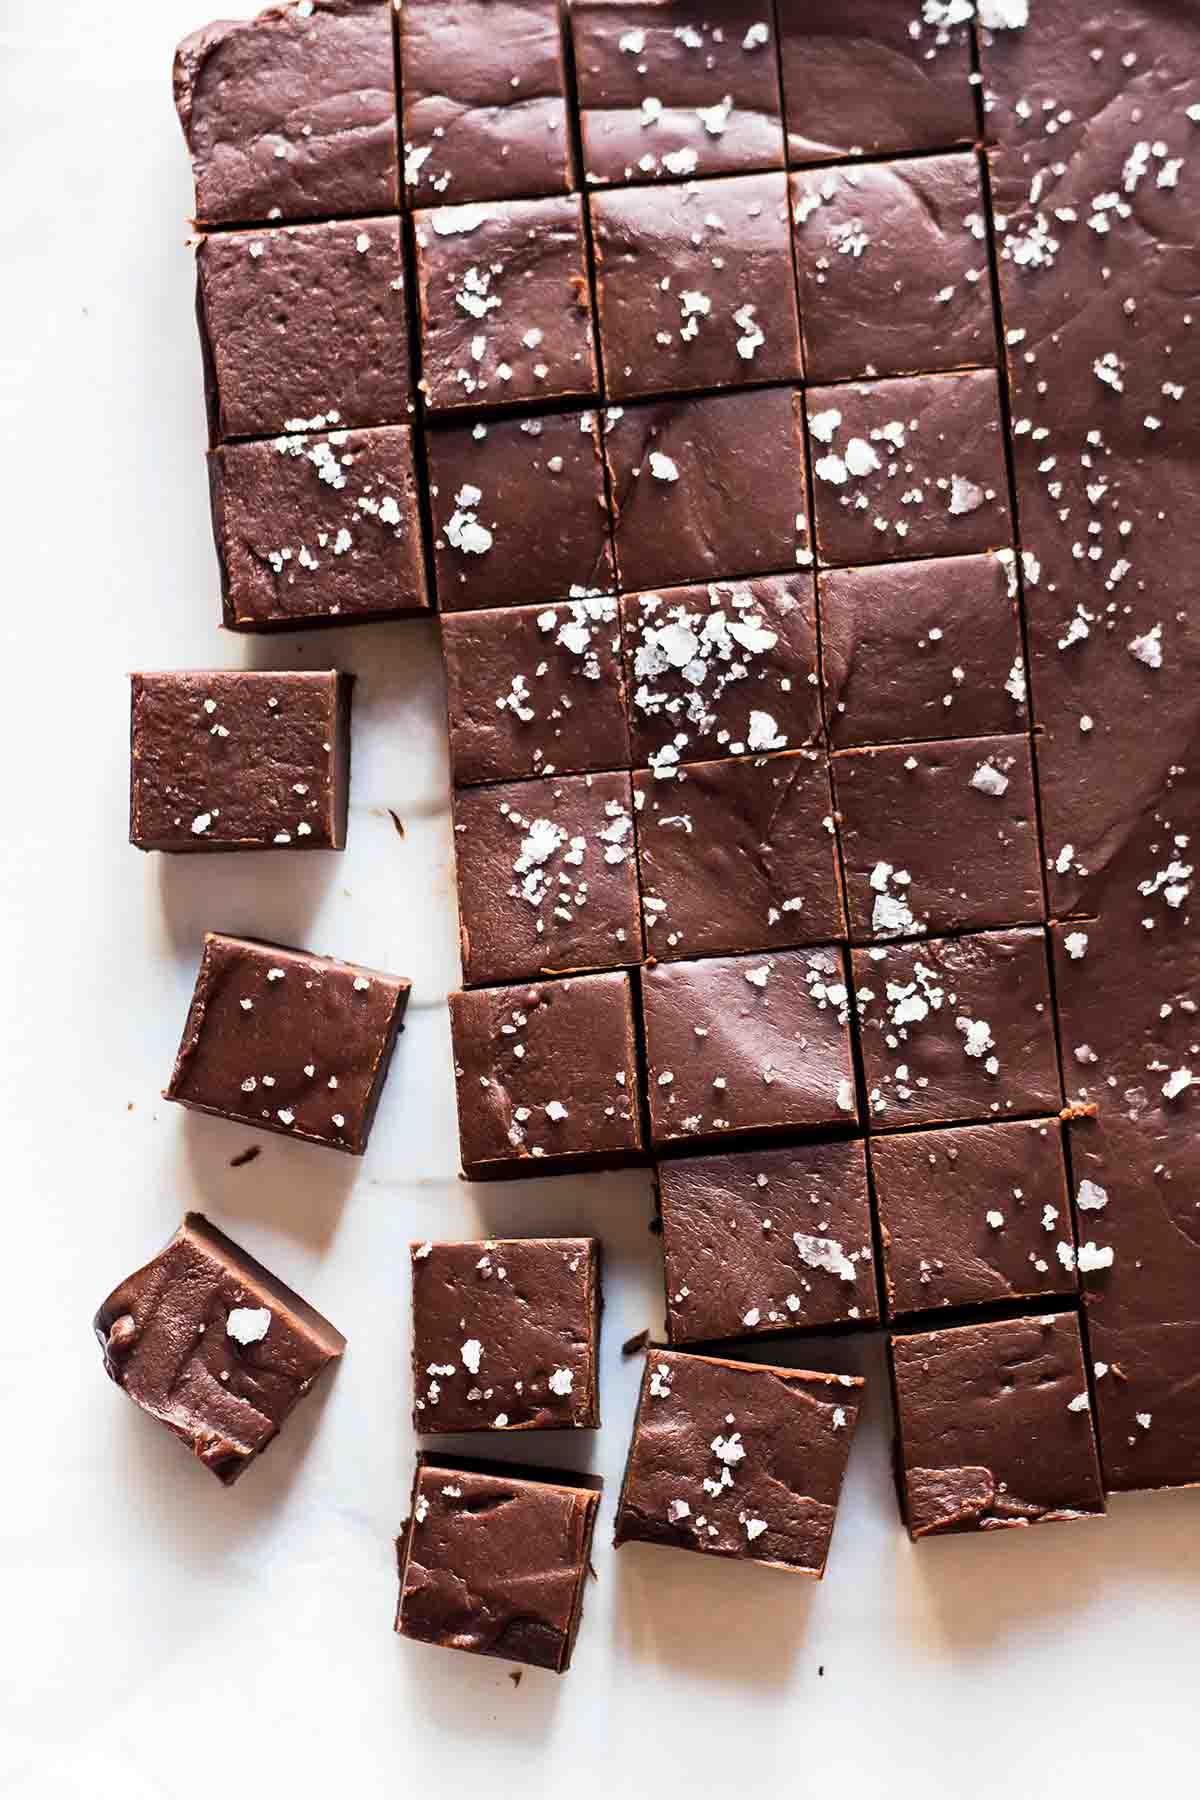 salted chocolate fudge square on parchment paper